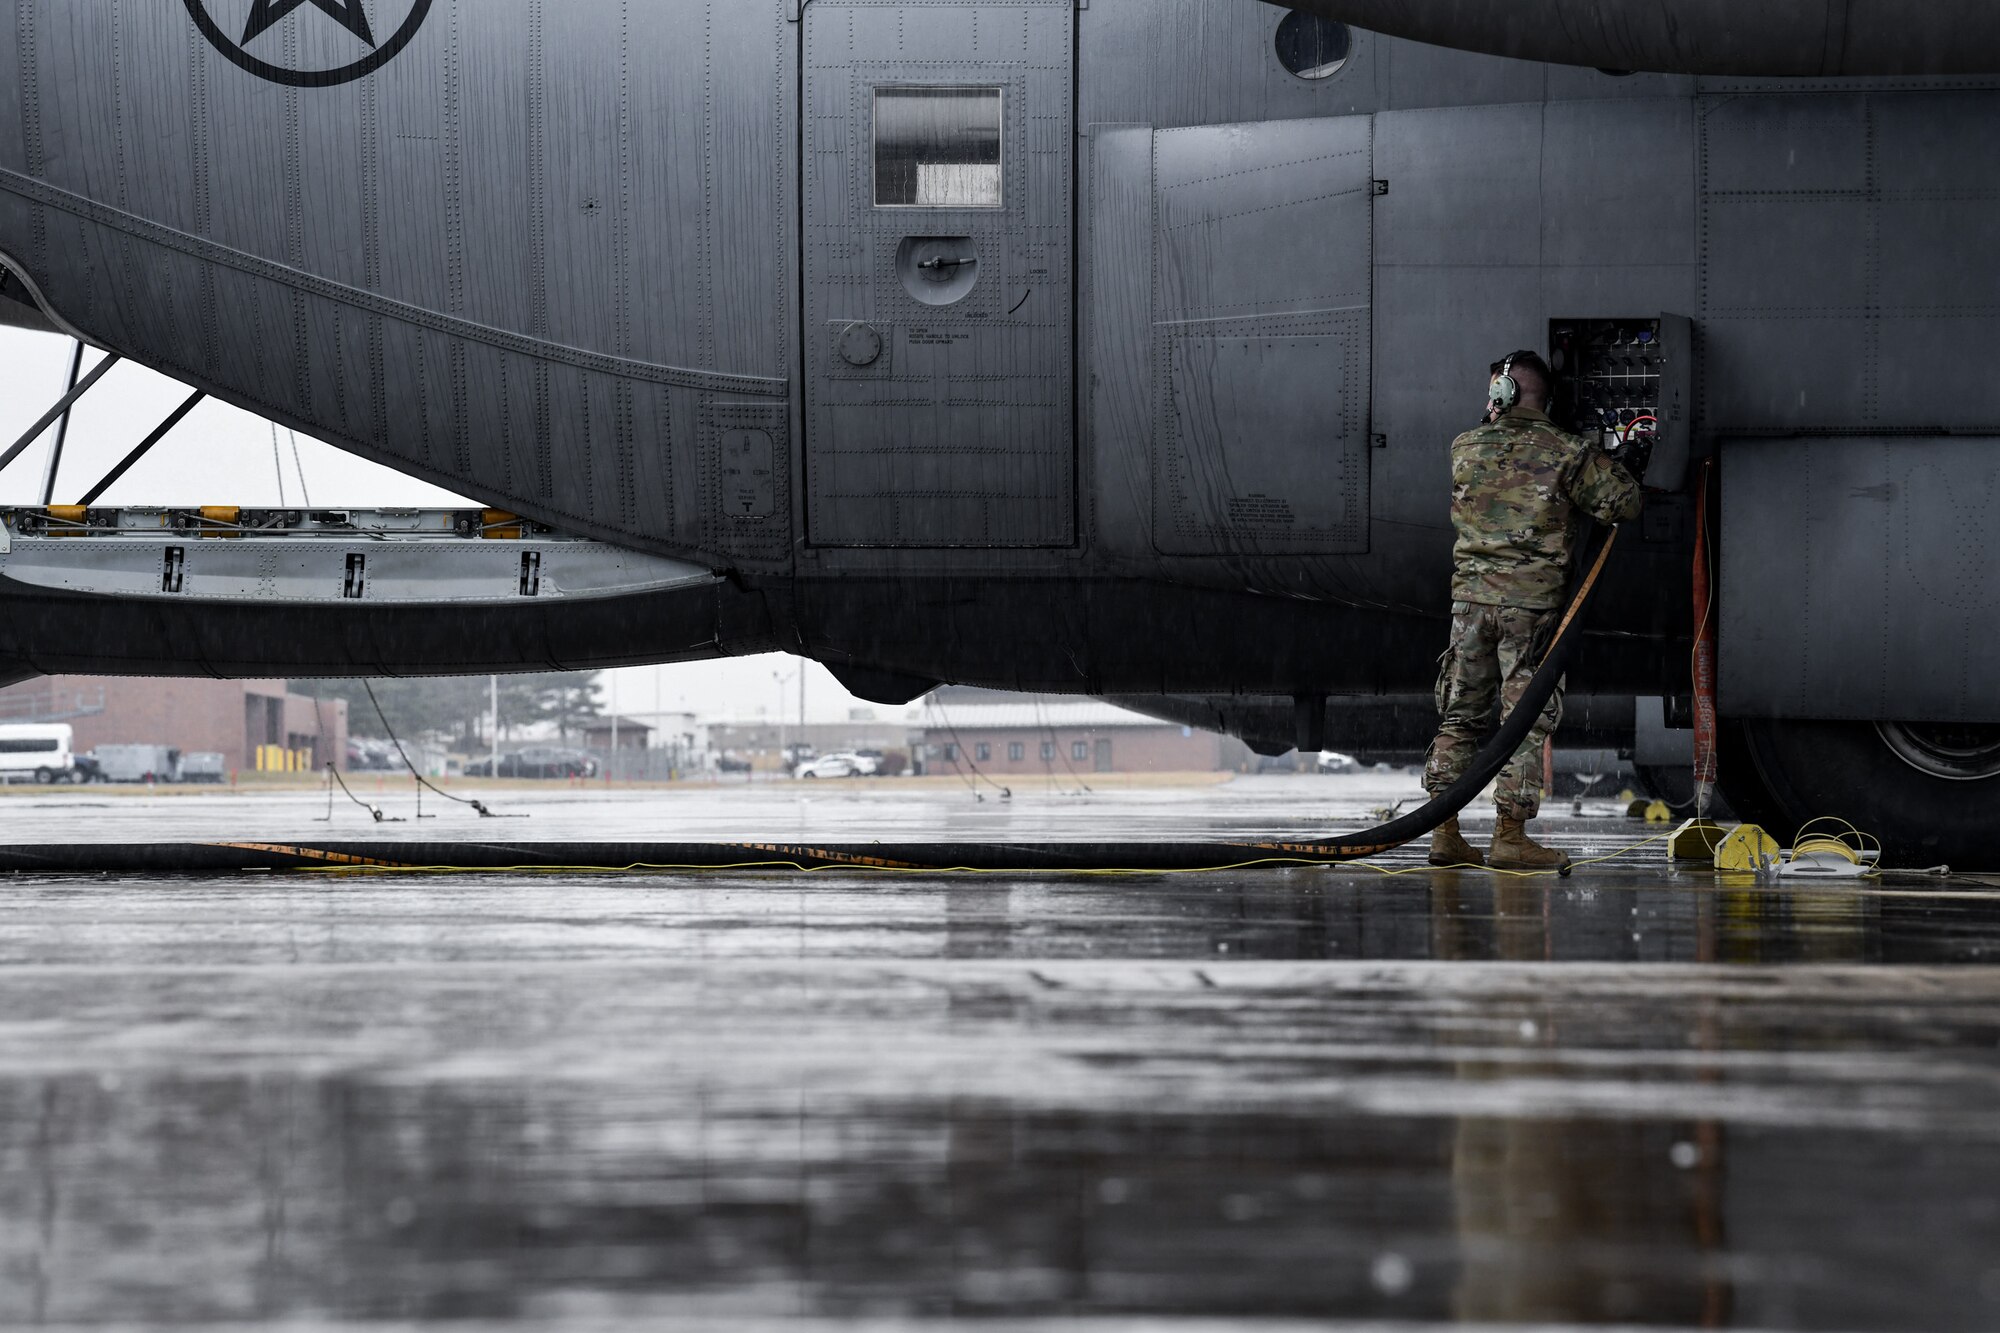 Senior Airman Creston Shirey, an aerospace maintenance journeyman assigned to the 910th Aircraft Maintenance Squadron, refuels a C-130H Hercules on Feb. 16, 2023, on the flight line at Youngstown Air Reserve Station, Ohio.